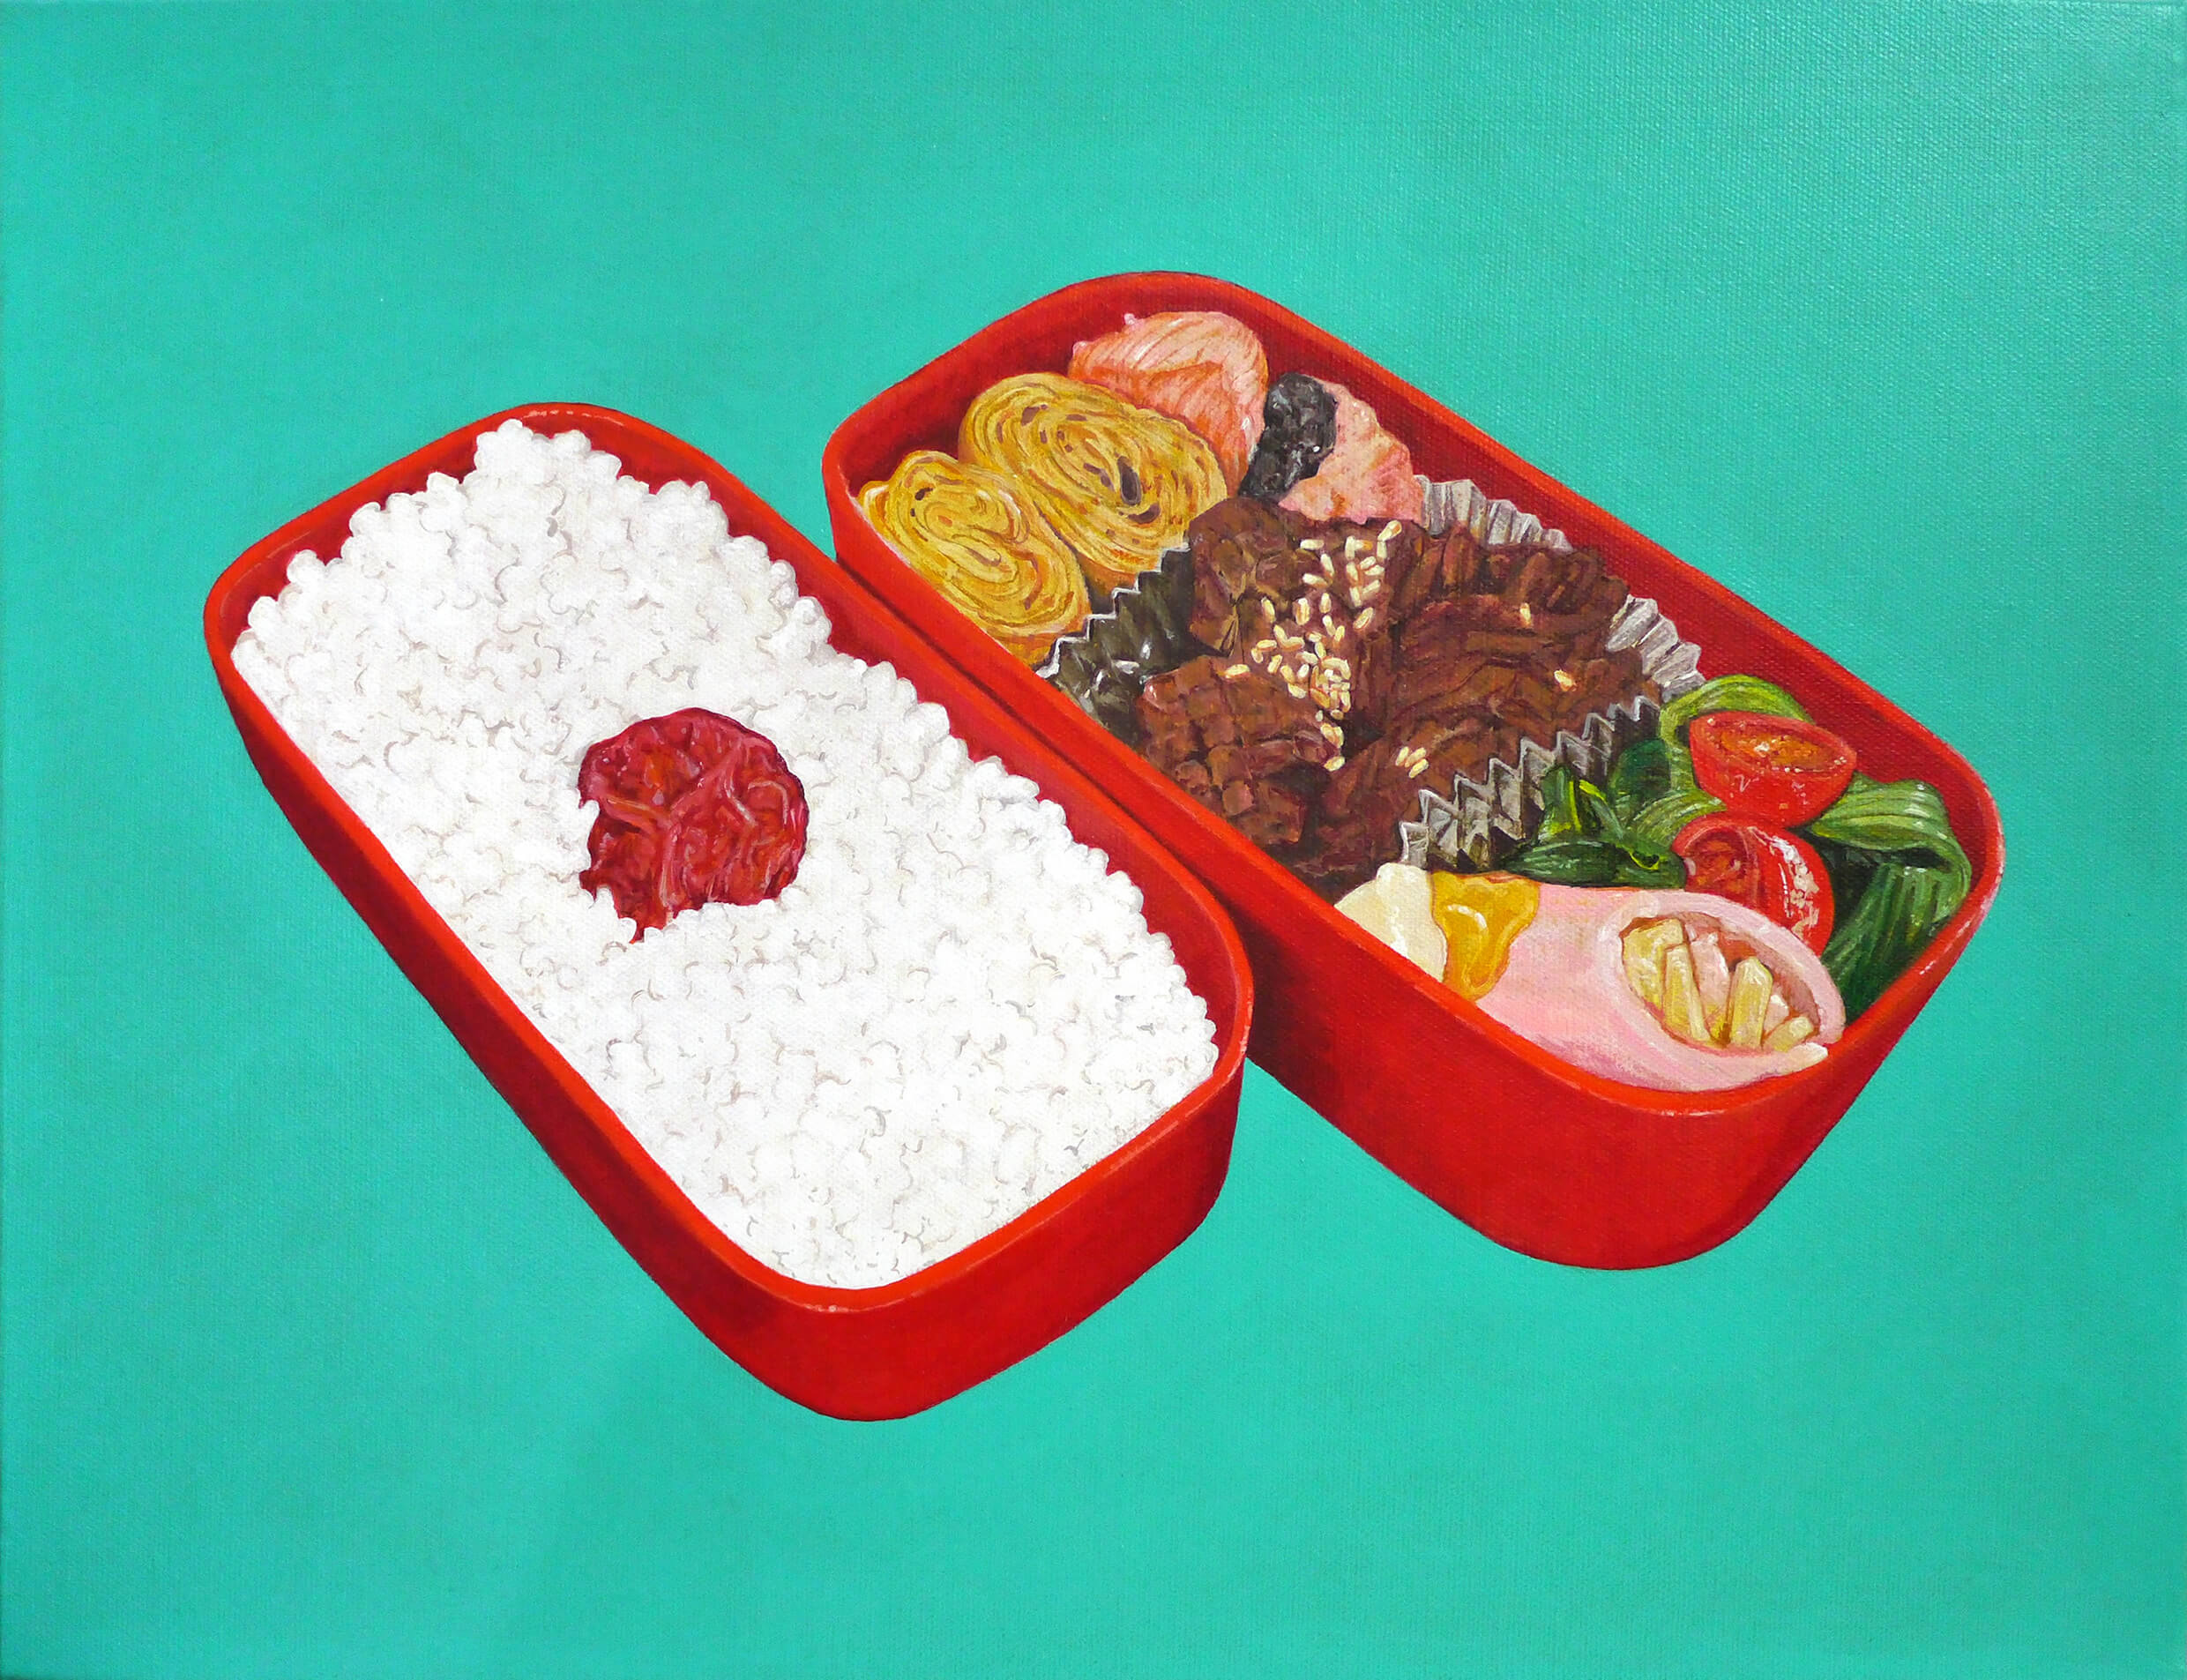 BENTO-May 27, 2018 (Calories 702 kcal, Protein 31.9 g, Total Fat 25.9 g, Total Carbohydrate 80.9 g, Sodium 10.1g / Ingredients; Rice, Japanese-style rolled omelette, Salted salmon, Eggplant and fried konjac, Pak choy, Mini tomato, Pickled plum, Ham, Cheese, Mayonnaise, Mustard, Vegetable oil, Mirin-like seasoning, Sugar, Soy sauce, Sesame)